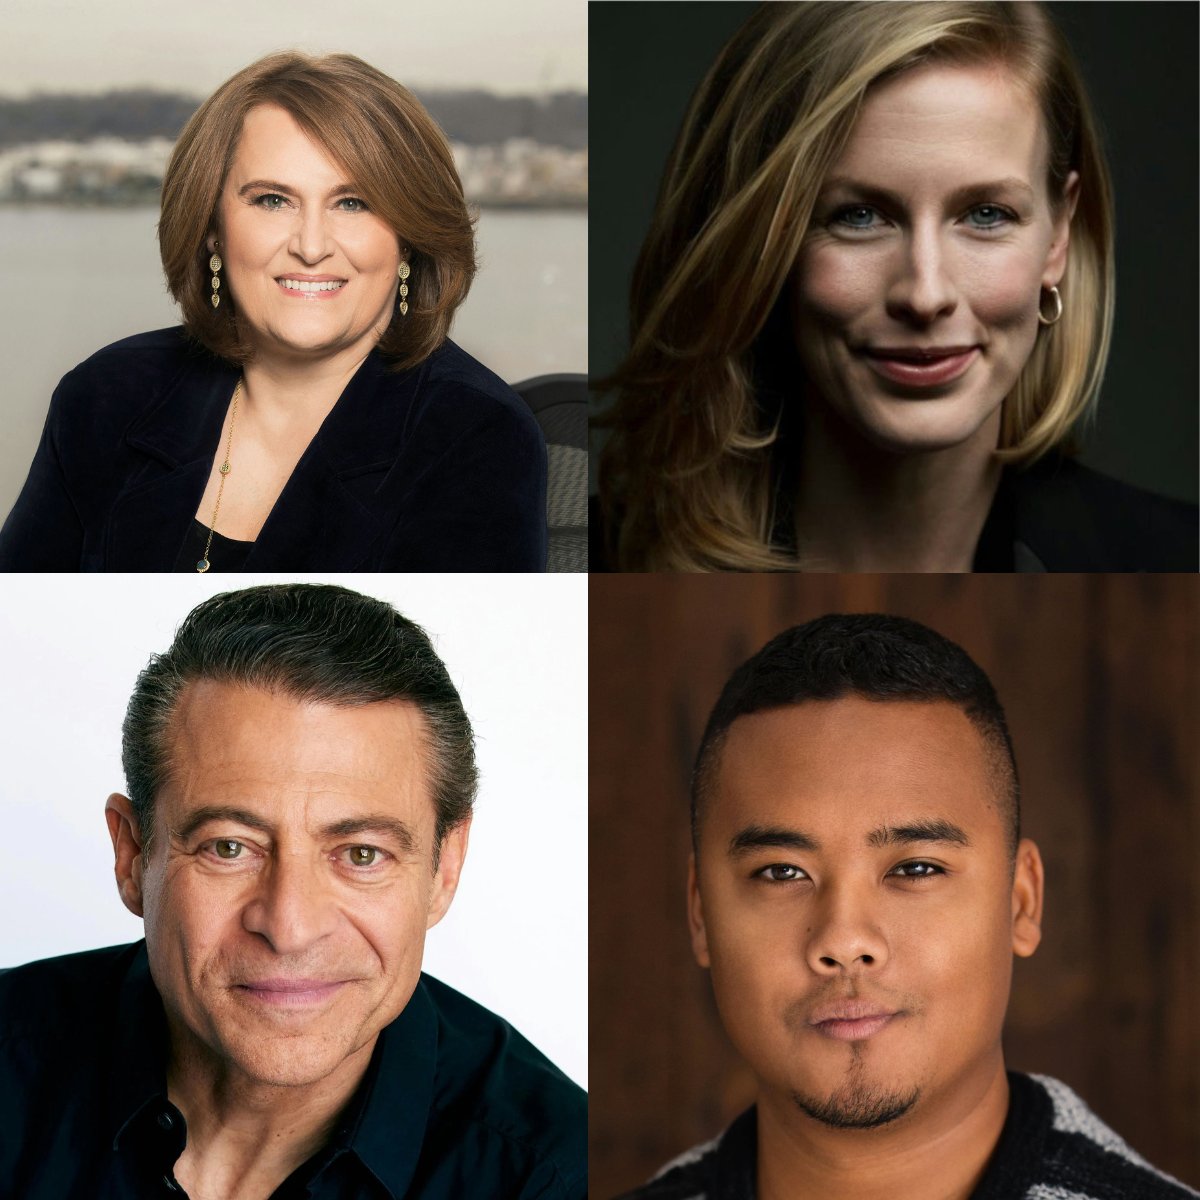 Announcing @PeterDiamandis, @ellakieran, @Diesol and @BryceSpaceTech's Carissa Bryce Christensen as our first set of speakers at CogX Festival USA! For a limited-time, you can Save 50% and secure your place at this transformative event. Find out more and book your tickets at